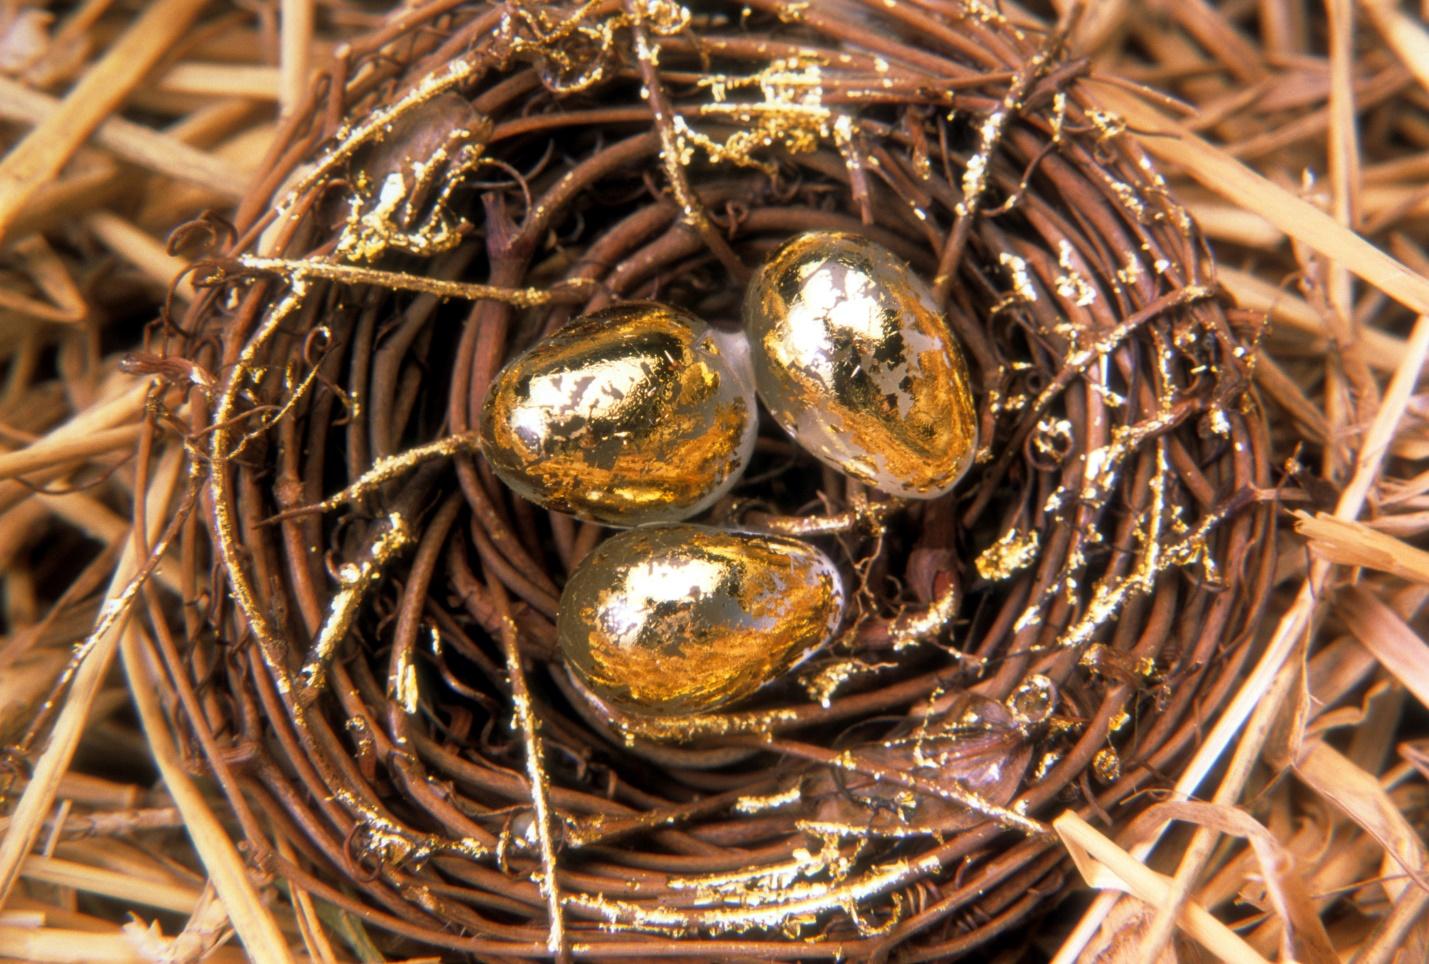 A nest with gold eggs

Description automatically generated